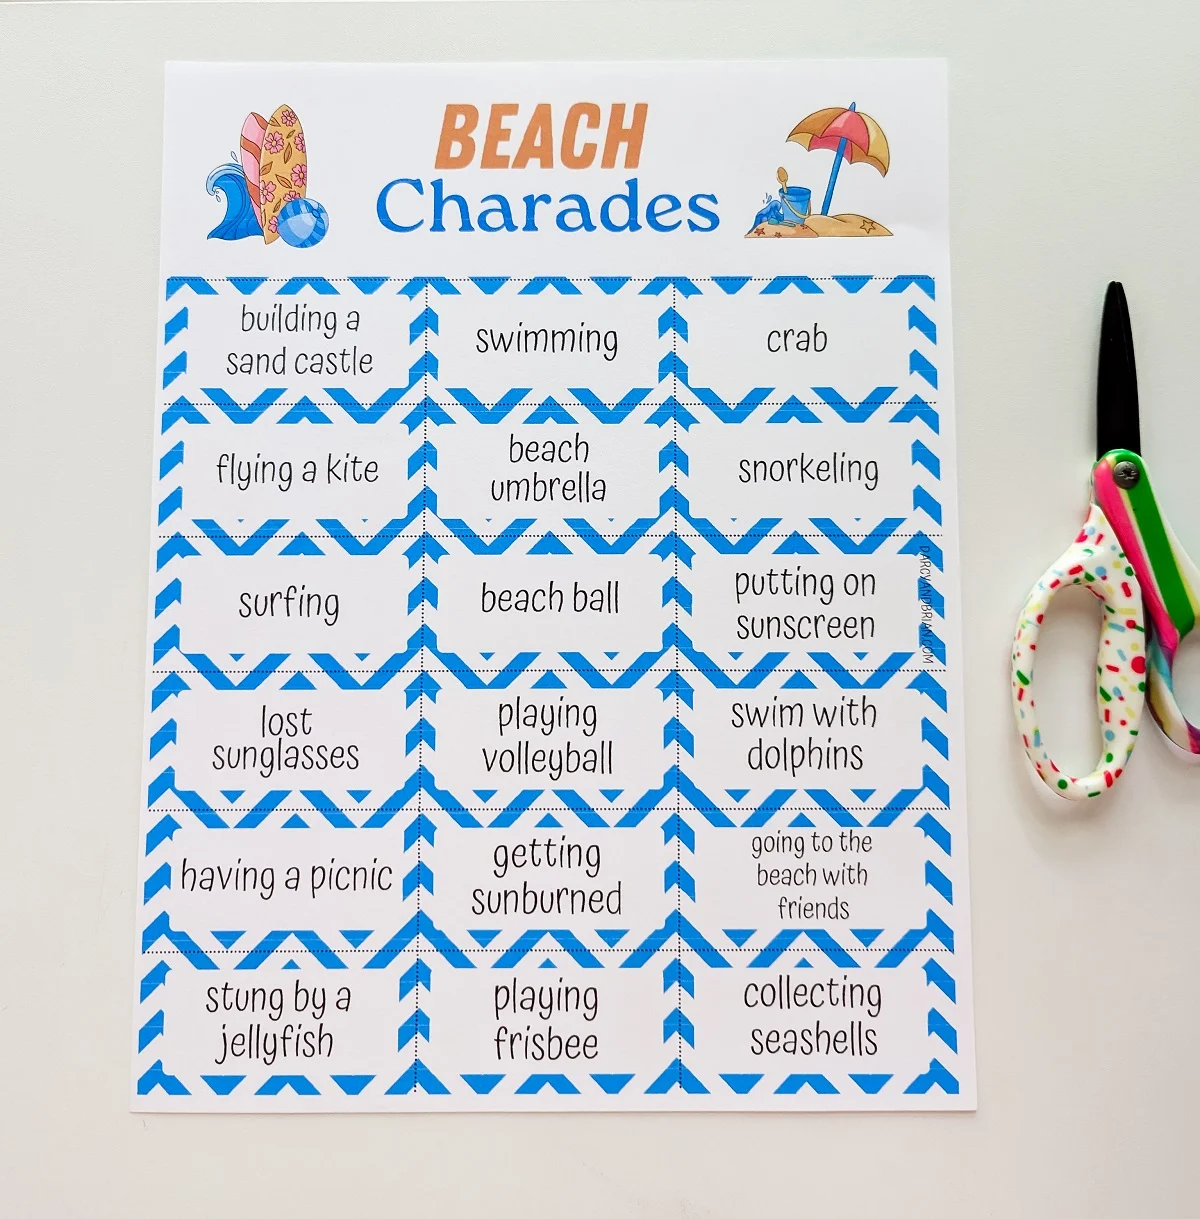 One page of beach charades printed out and laying on white desk top next to a colorful pair of kids scissors.